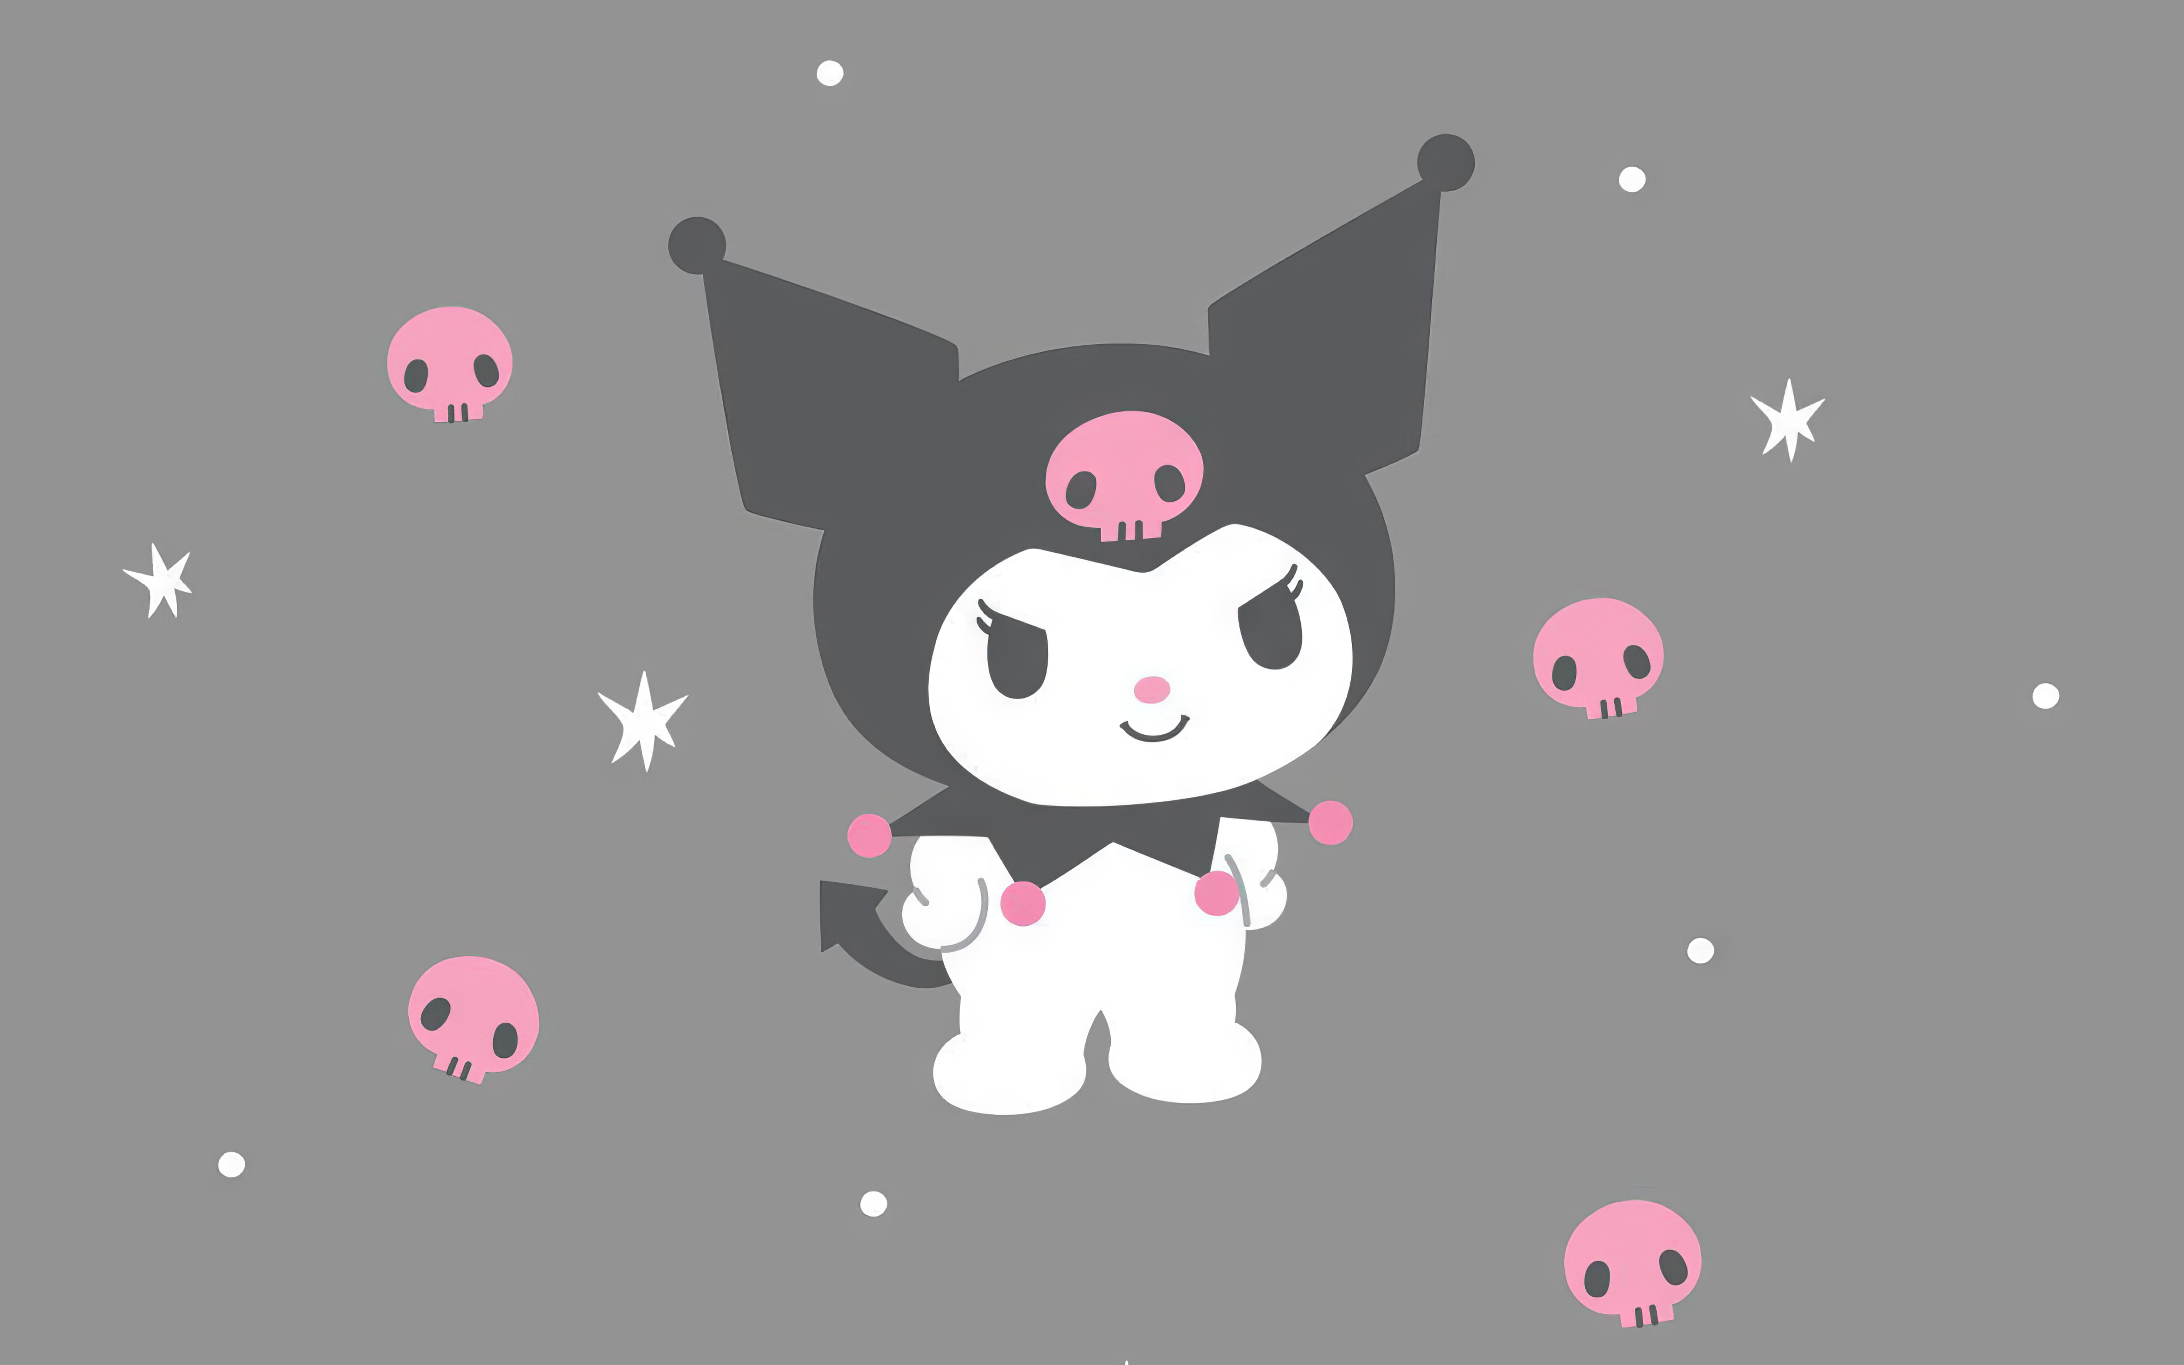 HD wallpaper of Kuromi from Onegai My Melody standing against a grey background with pink skulls and white stars.